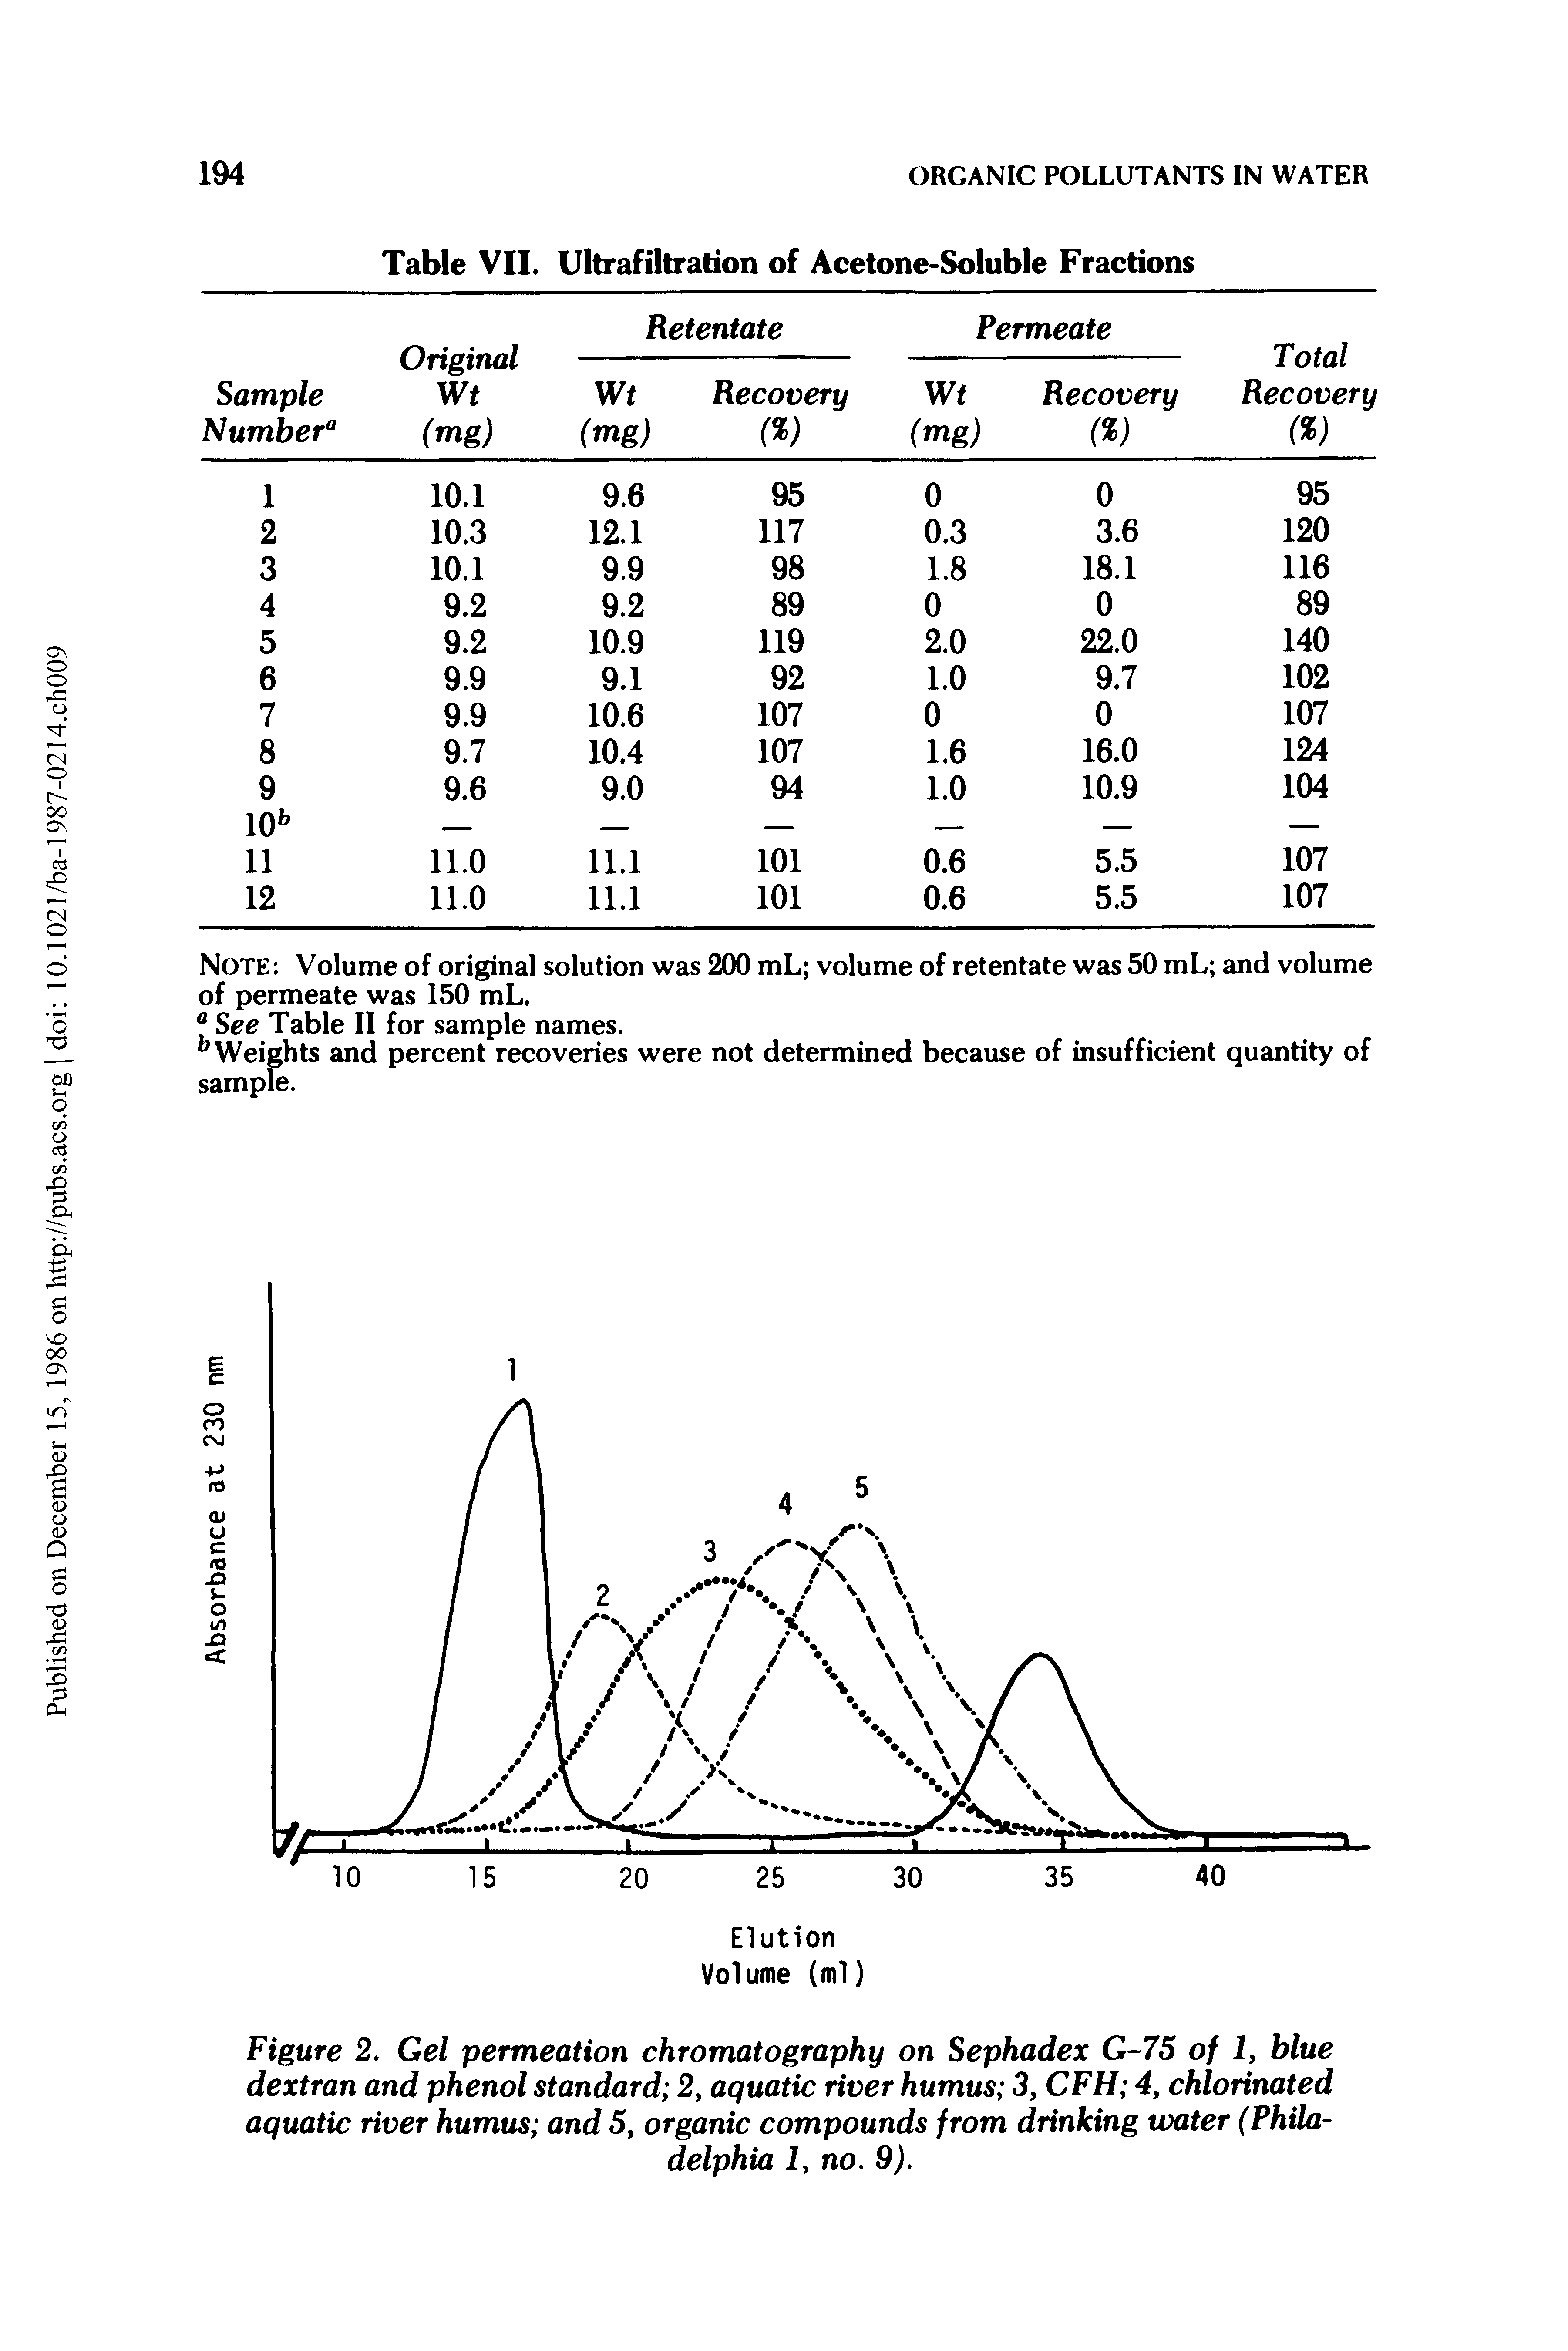 Figure 2. Gel permeation chromatography on Sephadex G-75 of 1, blue dextran and phenol standard 2, aquatic river humus 3, CFH 4, chlorinated aquatic river humus and 5, organic compounds from drinking water (Philadelphia I, no. 9).